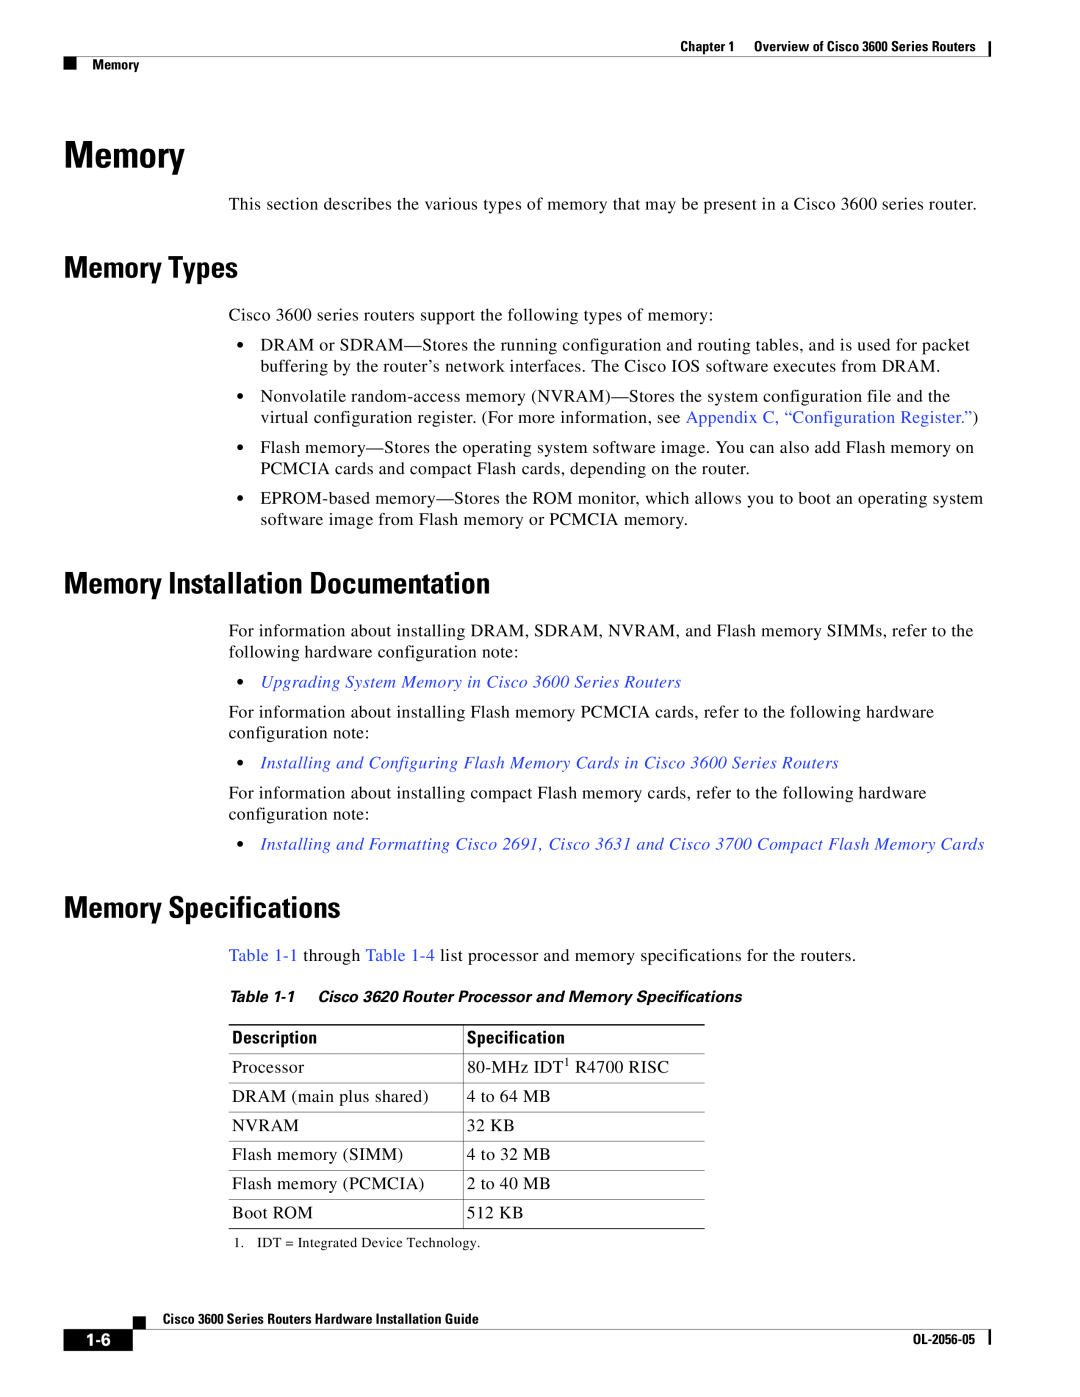 Cisco Systems 3600 specifications Memory Types, Memory Installation Documentation, Memory Specifications, Description 